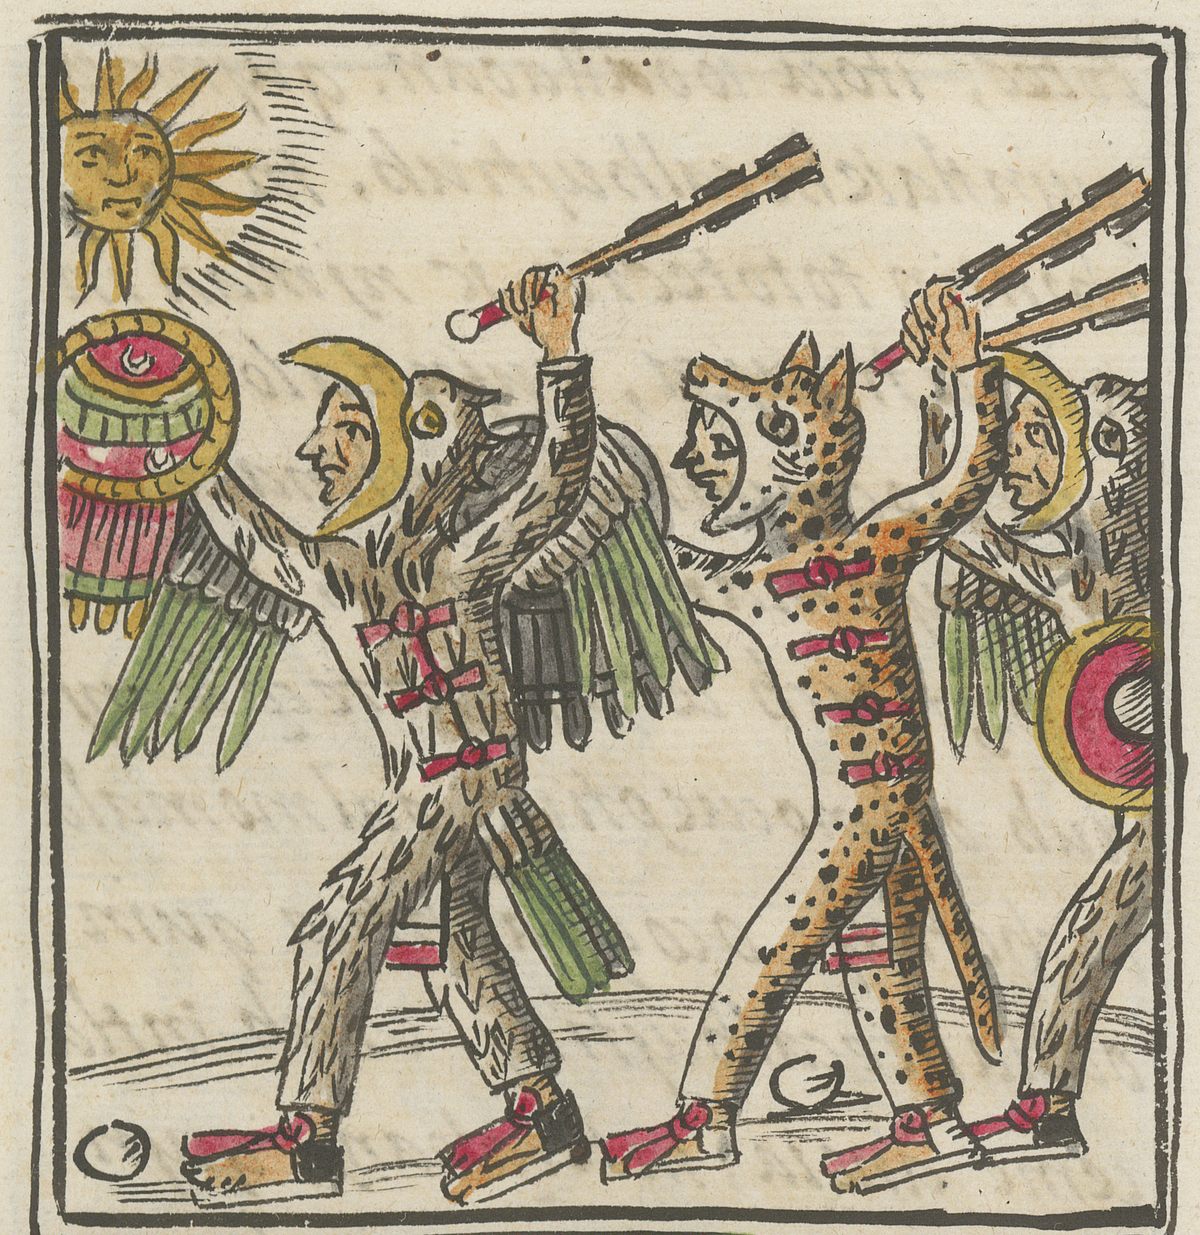 The second book of the codex details calendars, festivals, and ceremonies, and includes this depiction of Mexica jaguar and eagle warriors. 